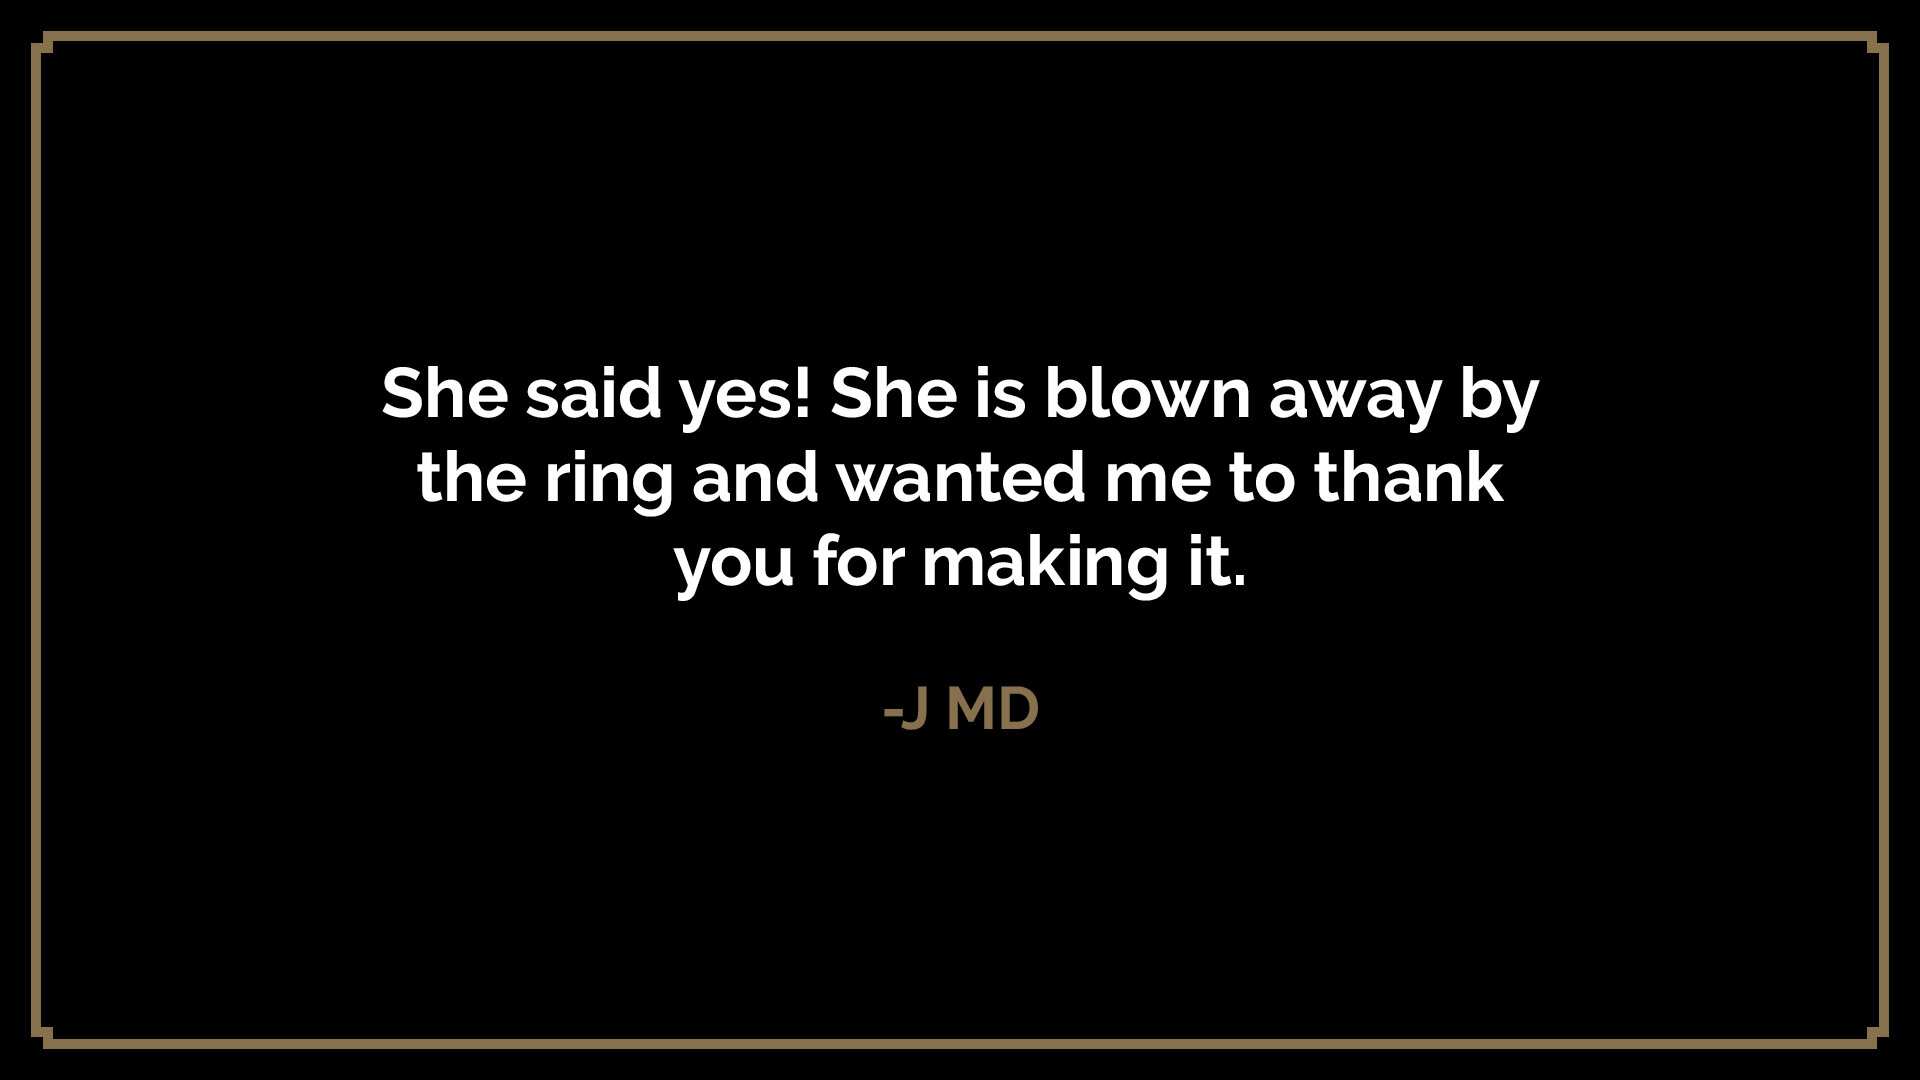  She said yes! She is blown away by the ring and wanted me to thank you for making it.  -J MD 